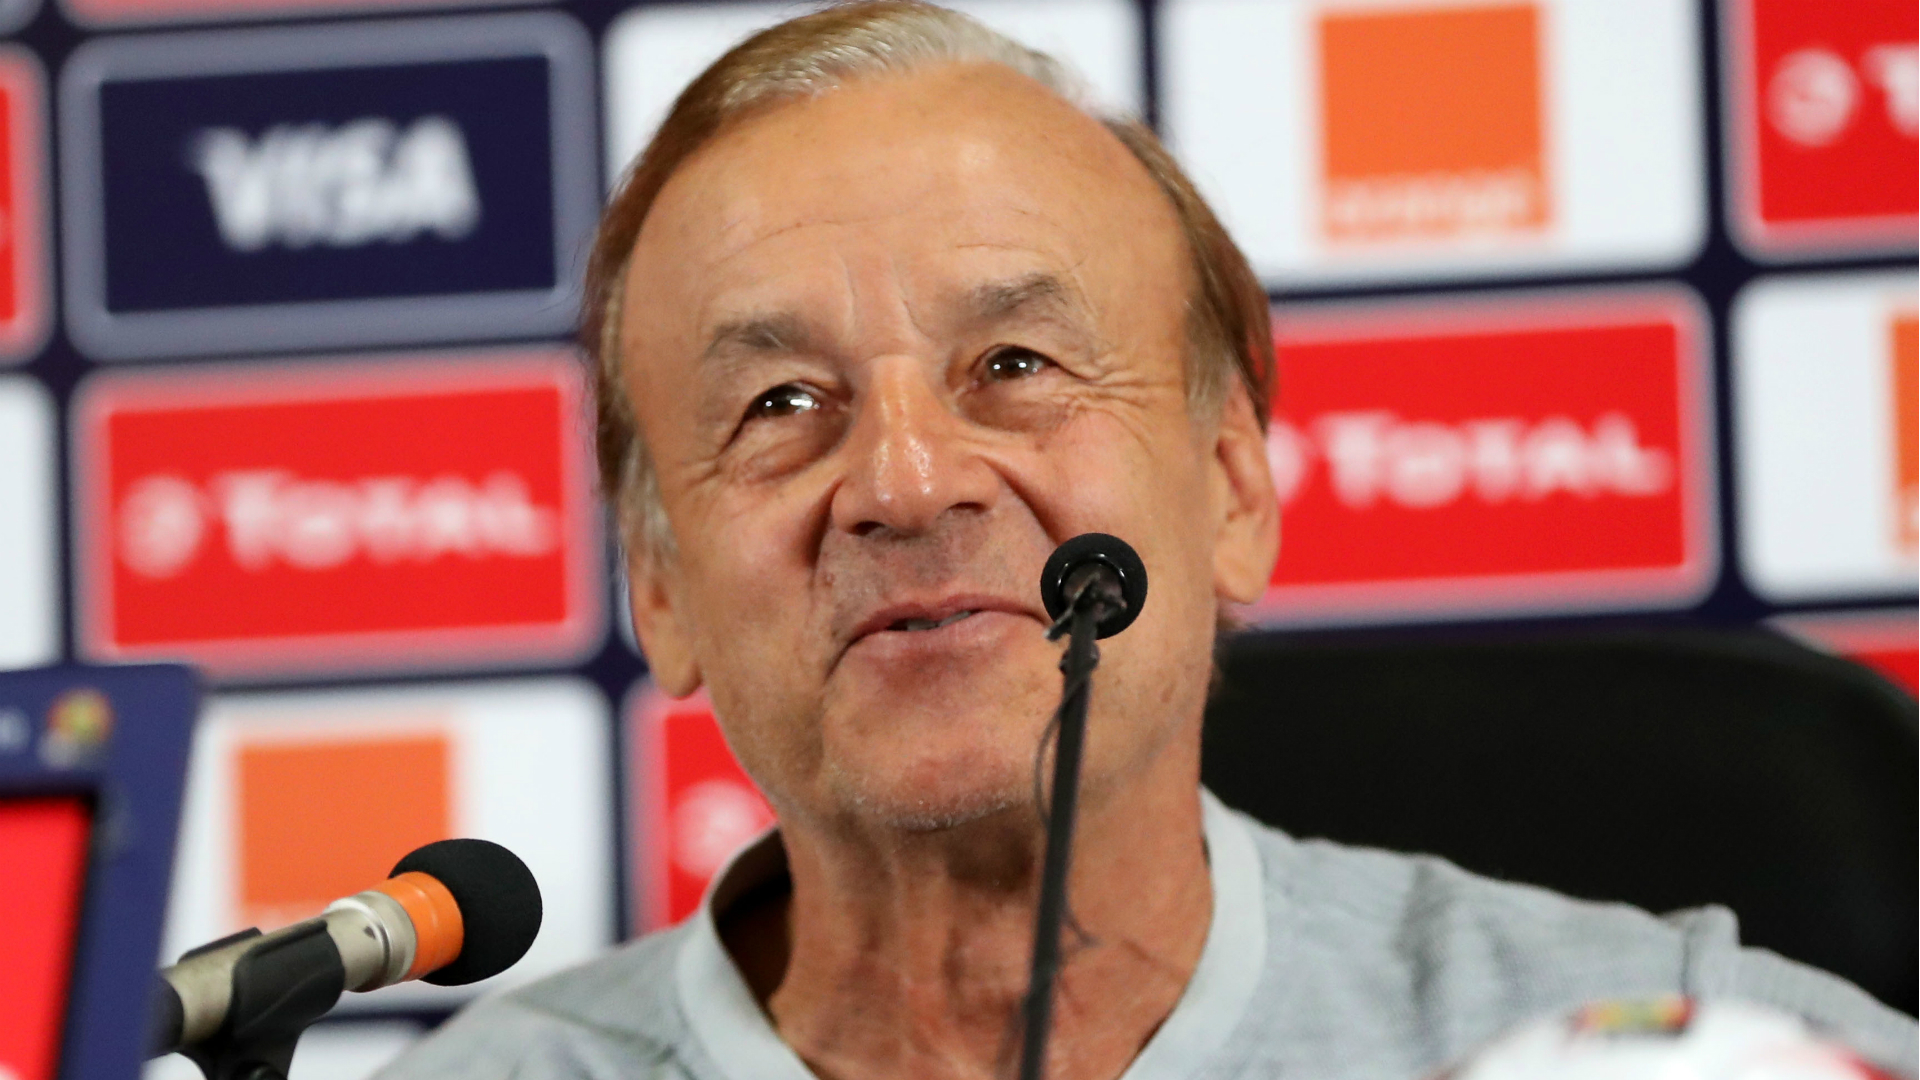 Nigeria coach Rohr hints at inviting NPFL players for World Cup qualifiers after Mexico thumping